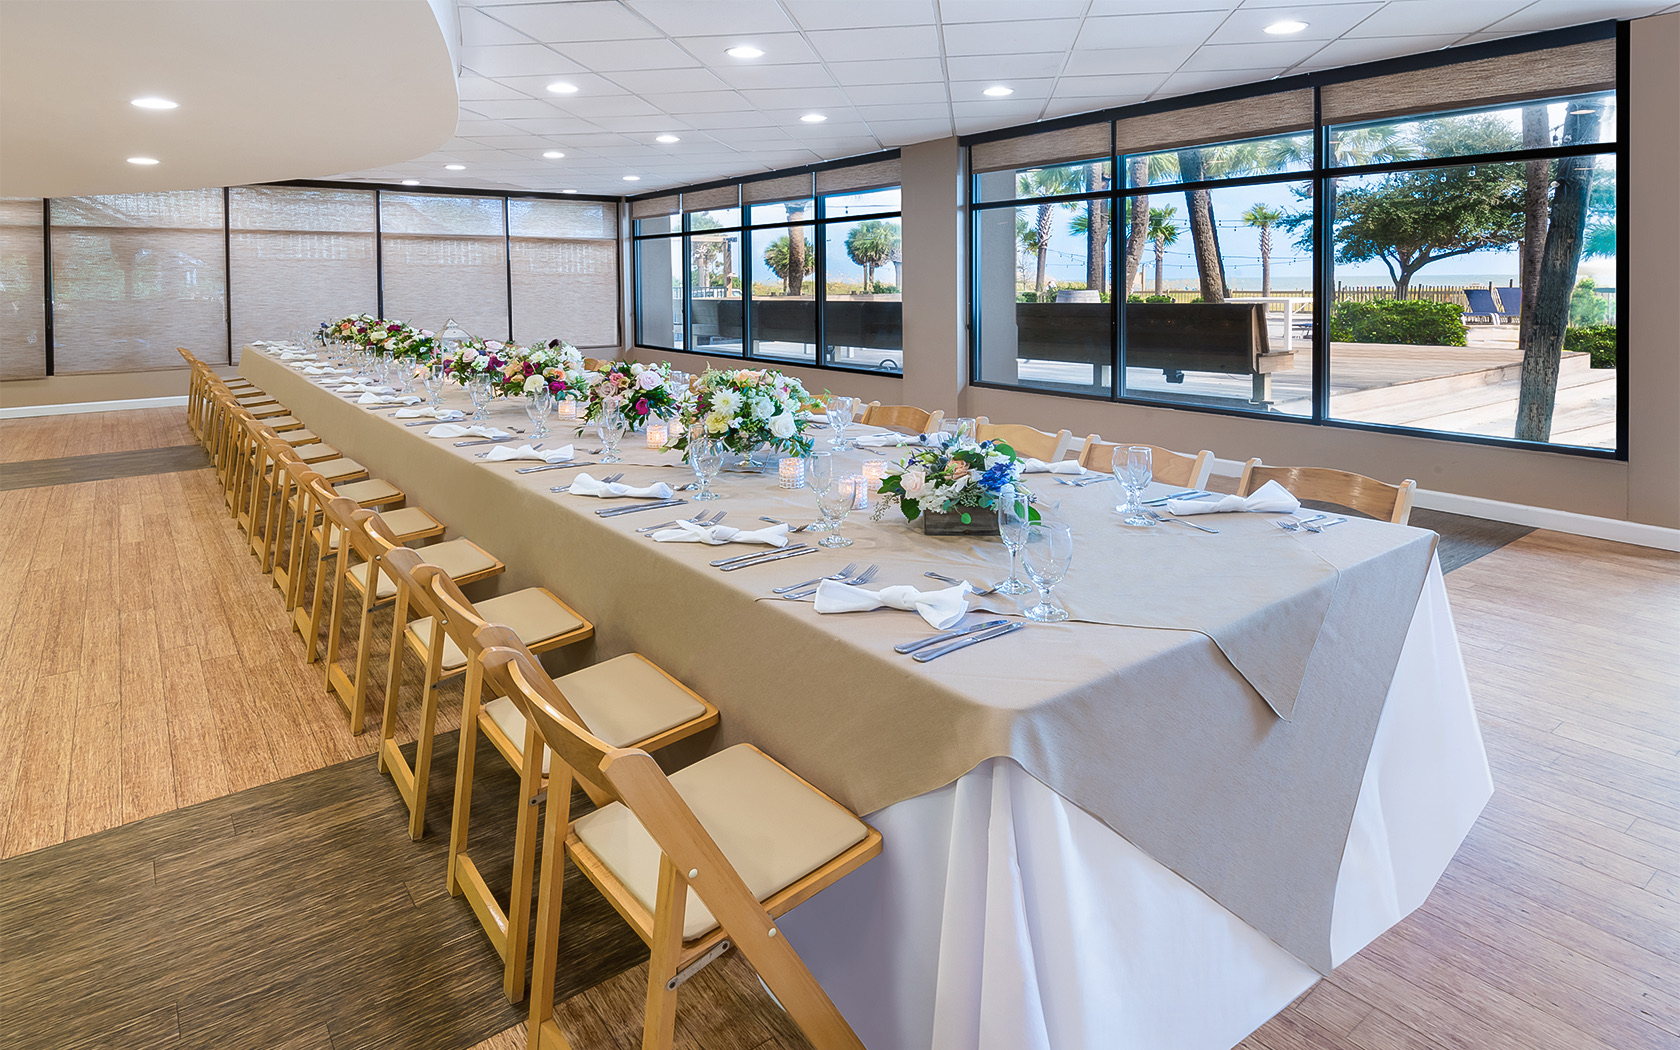 a long rectangle shaped table with wooden chairs and many floral centerpieces